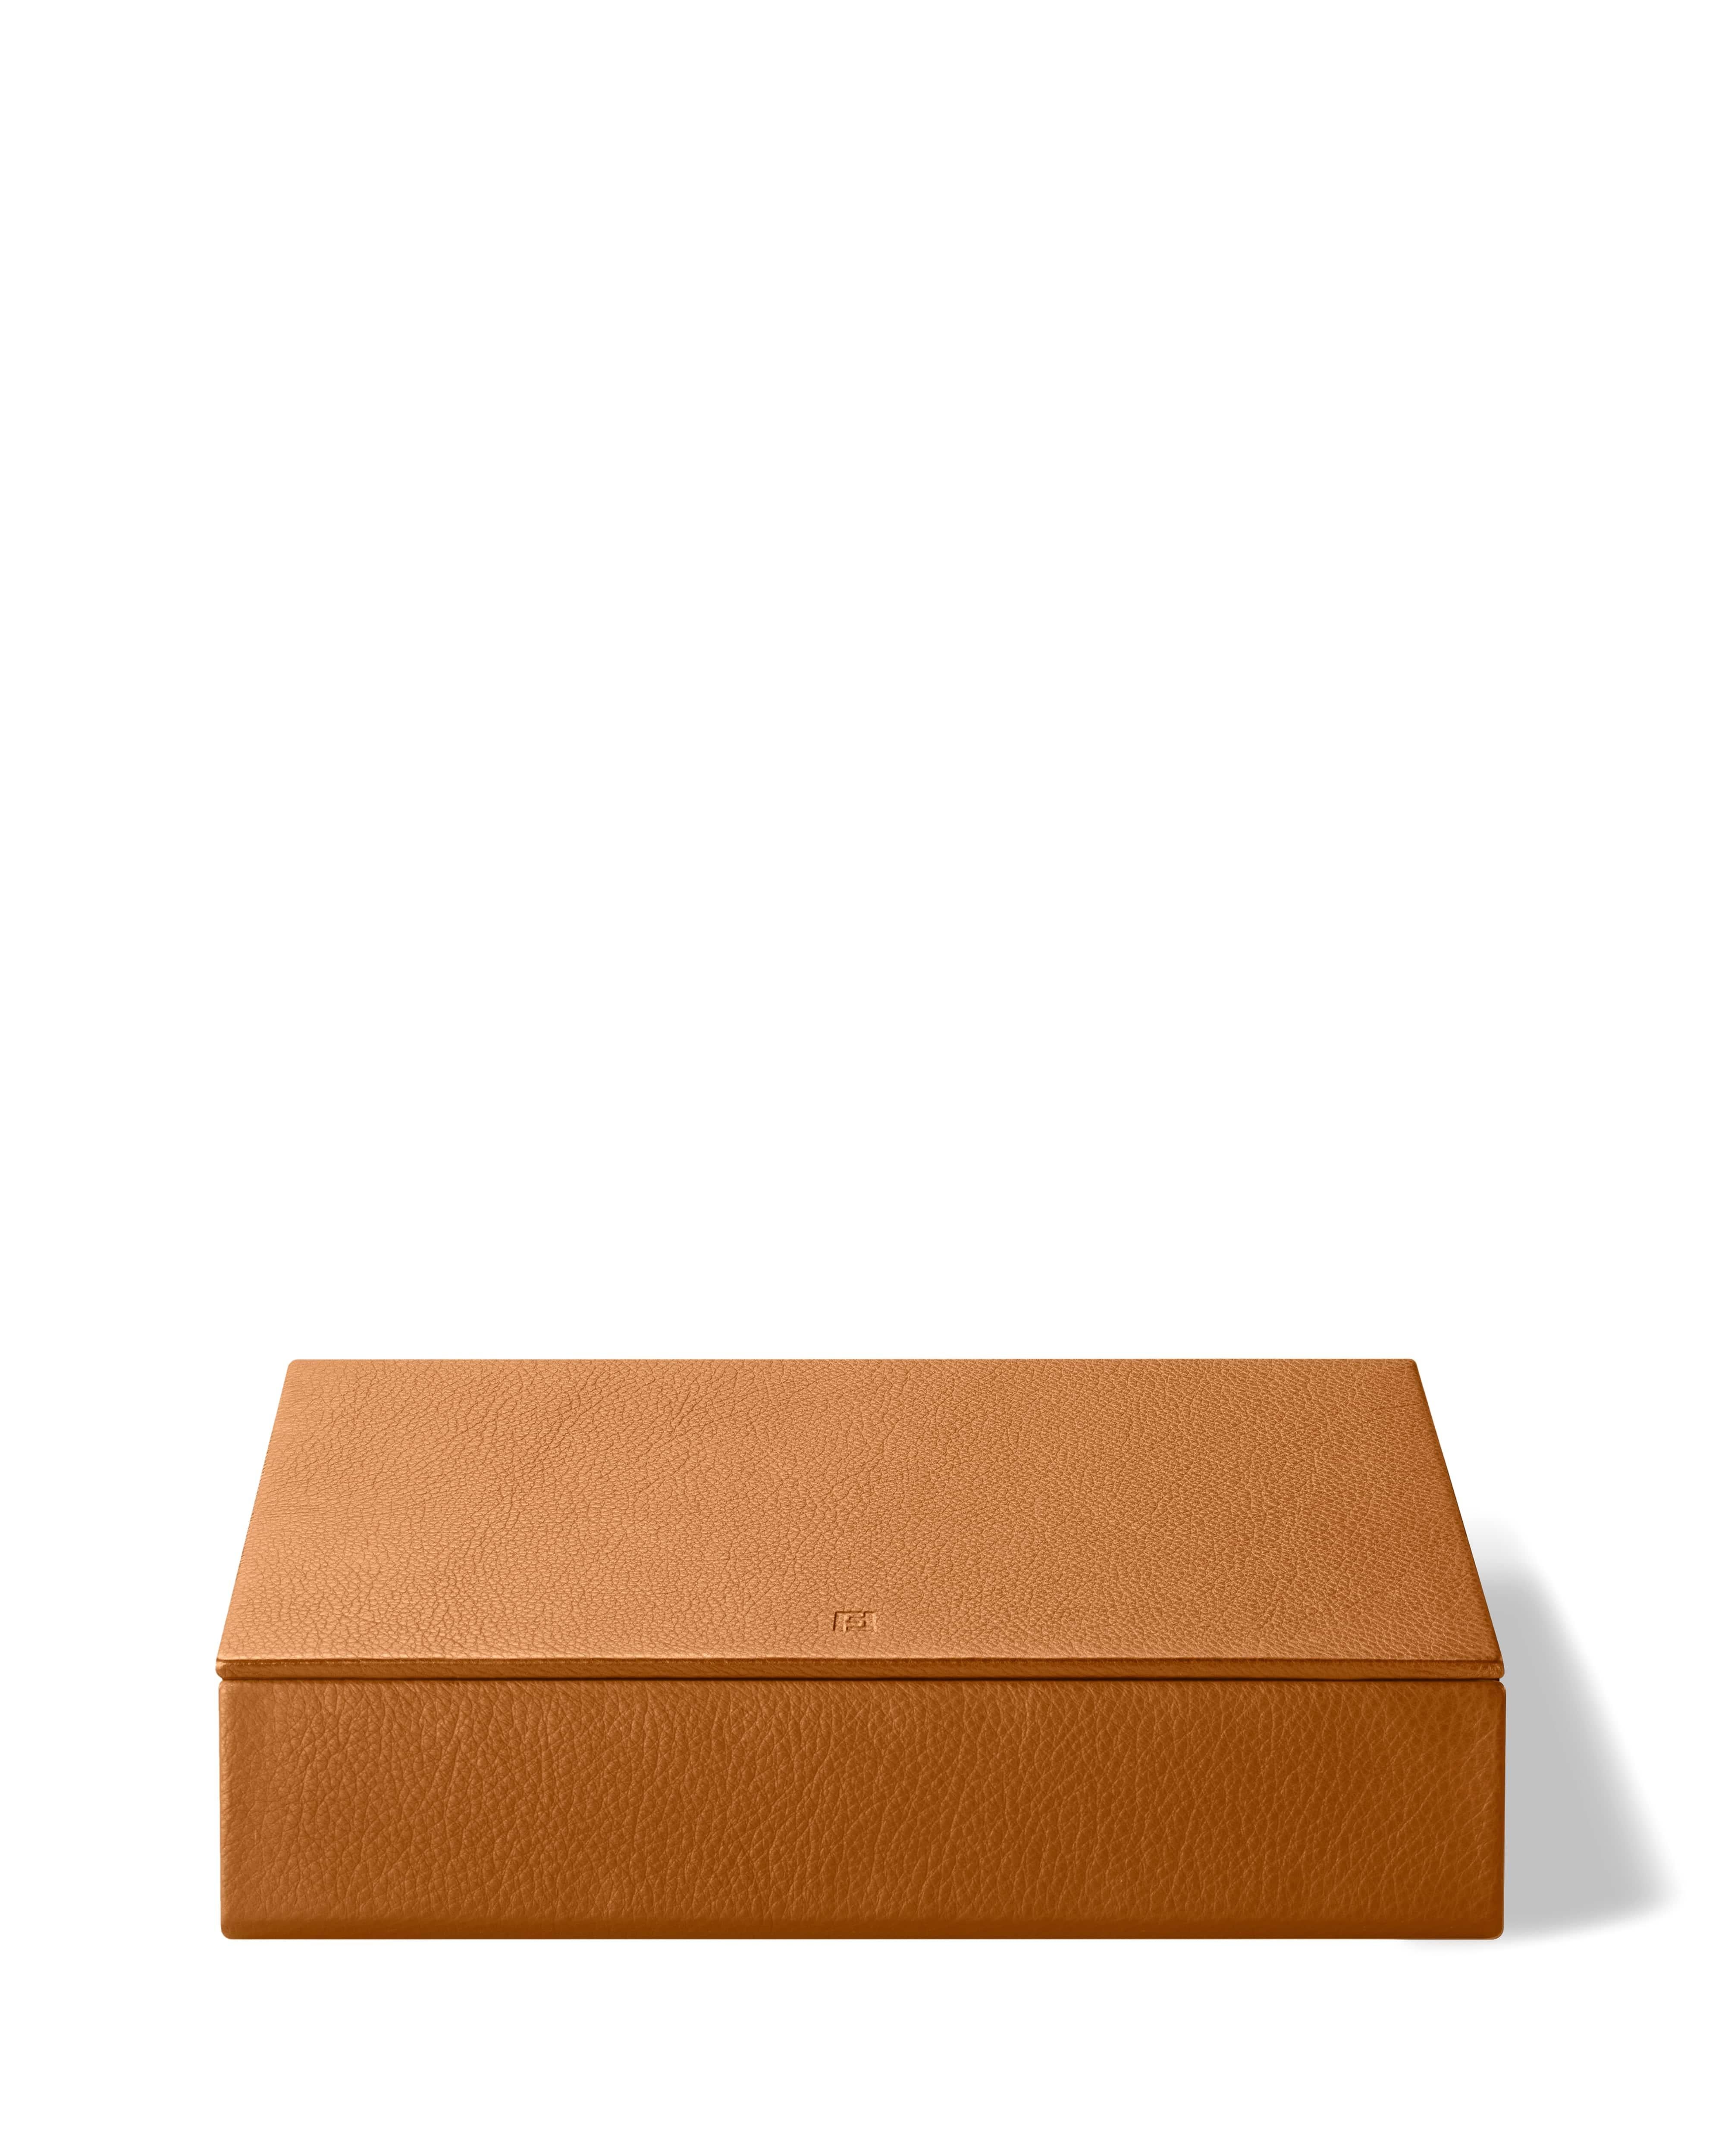 Scandinavian Modern Handcrafted Leather Box Organizer, by August Sandgren for Fredericia For Sale